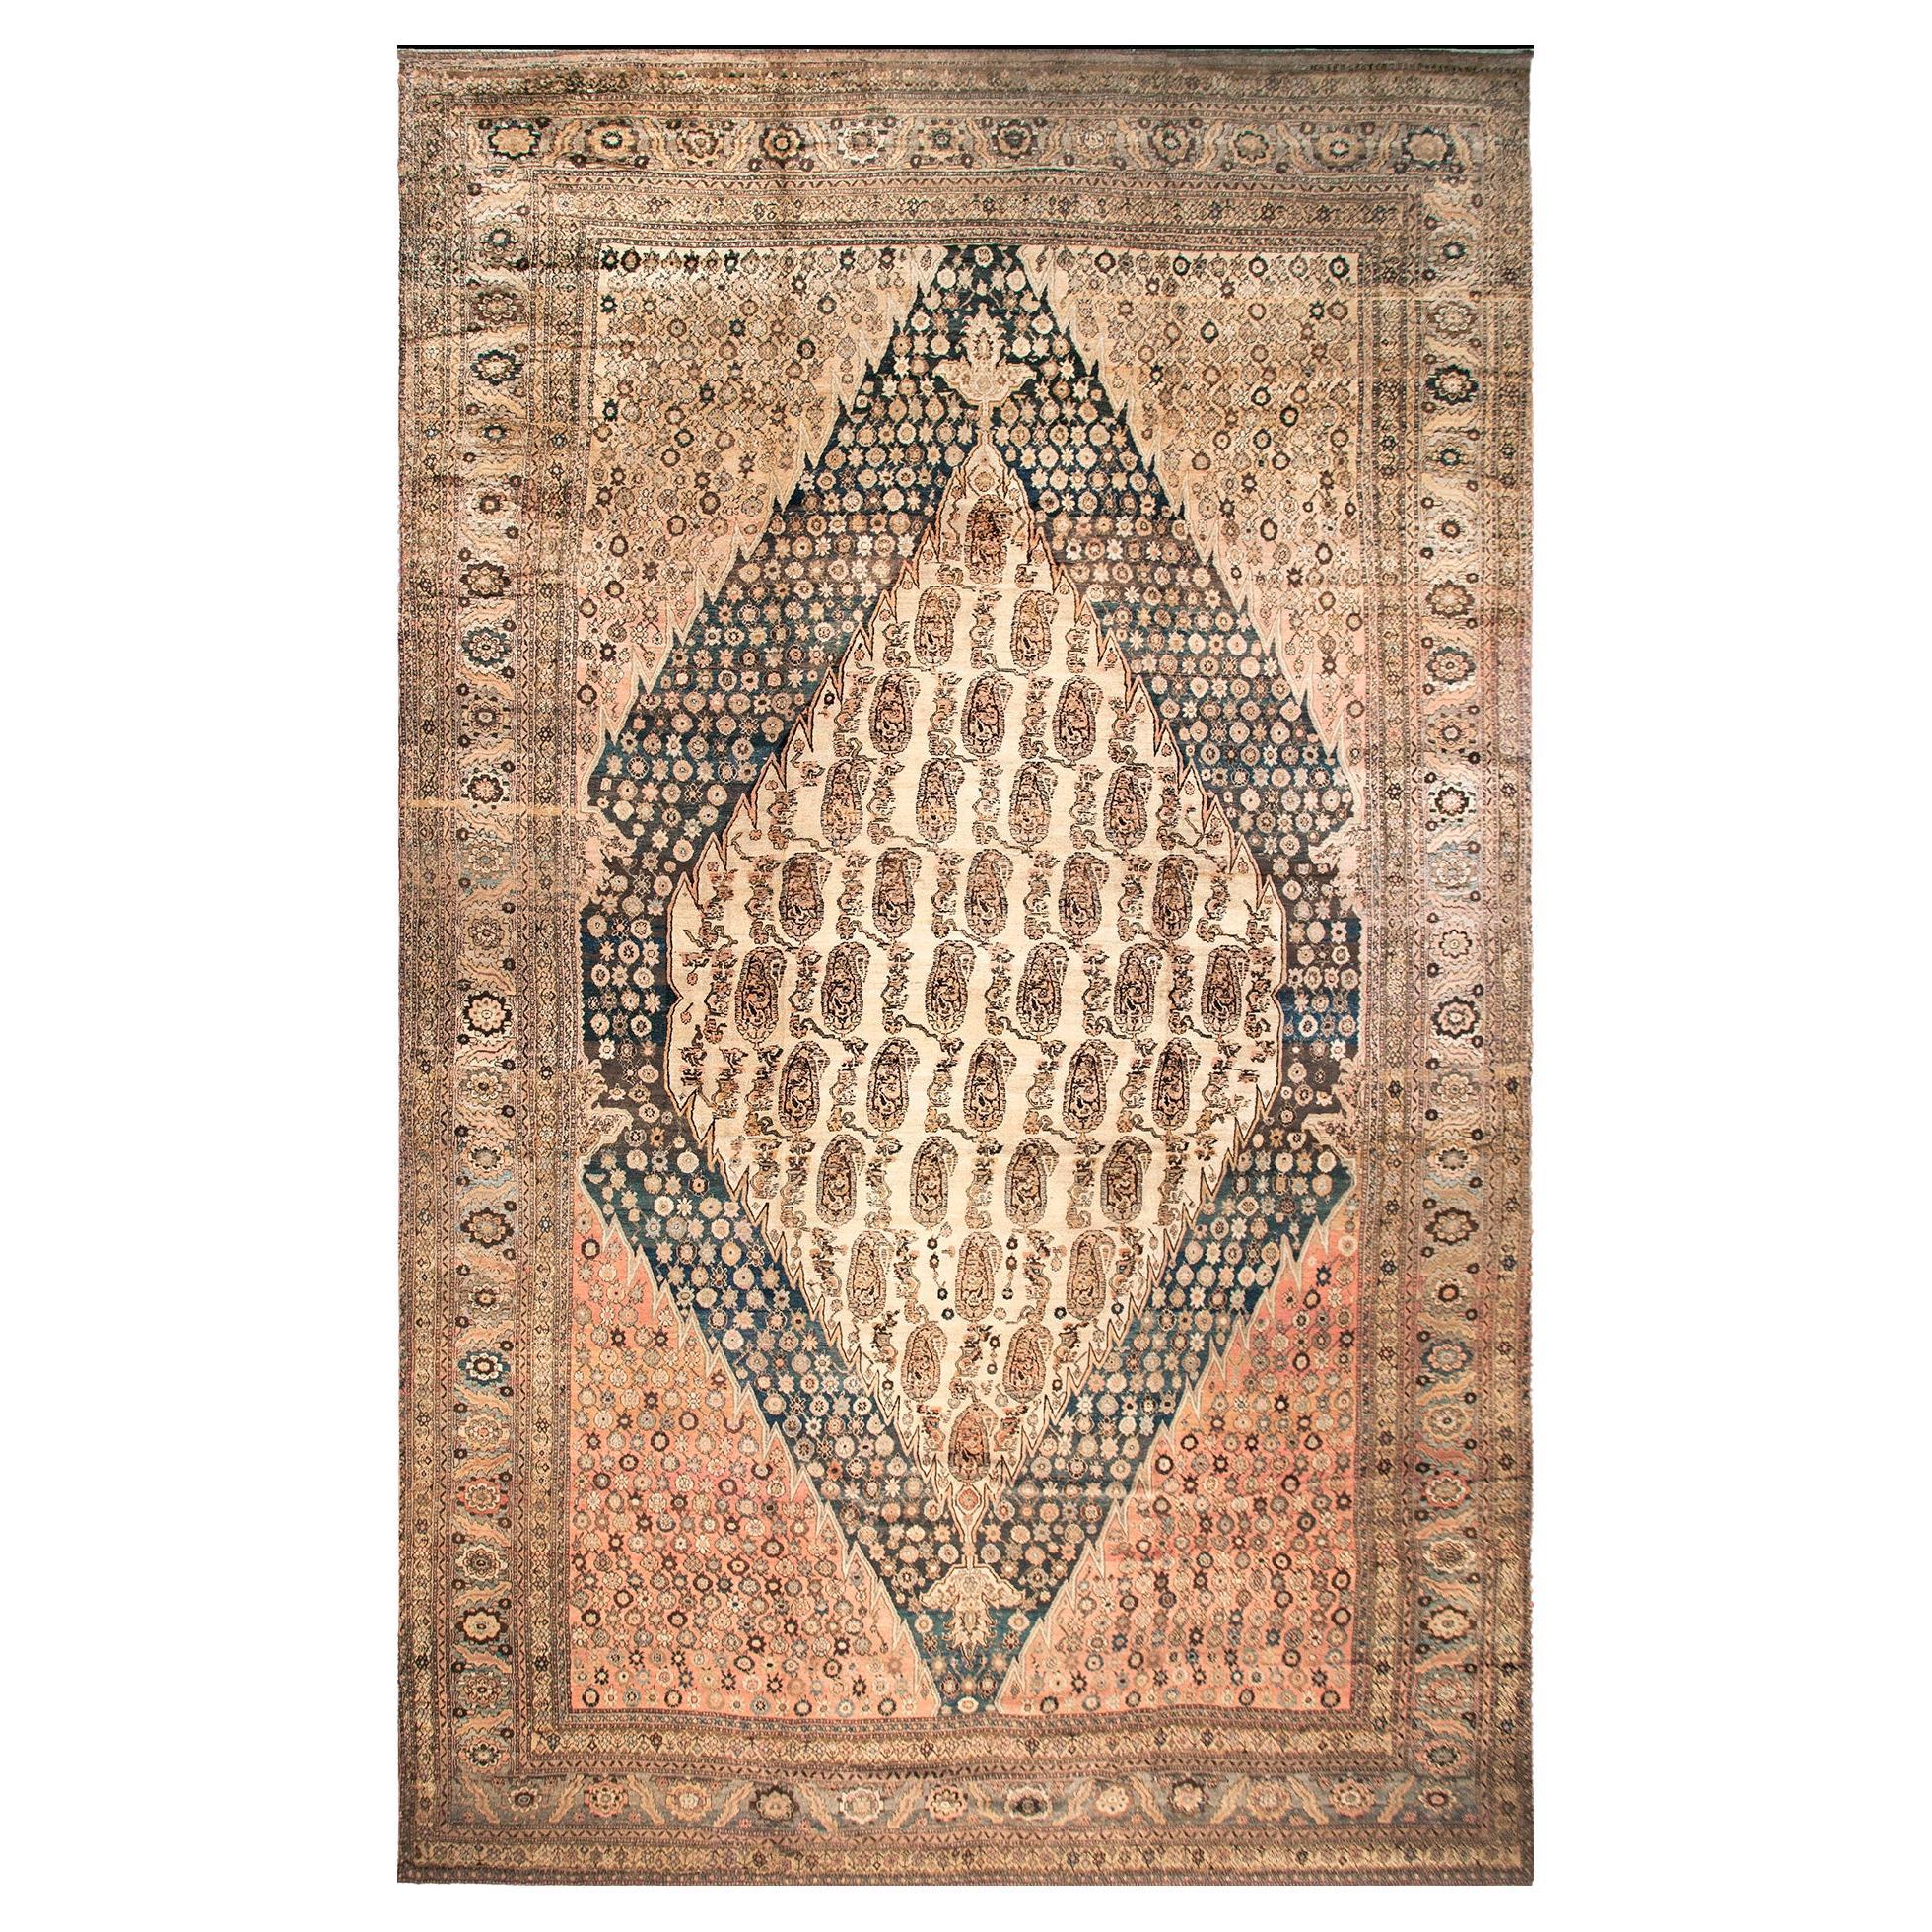 Early 20th Century Persian Malayer Carpet ( 13'3" x 22'4" - 404 x 680 ) For Sale